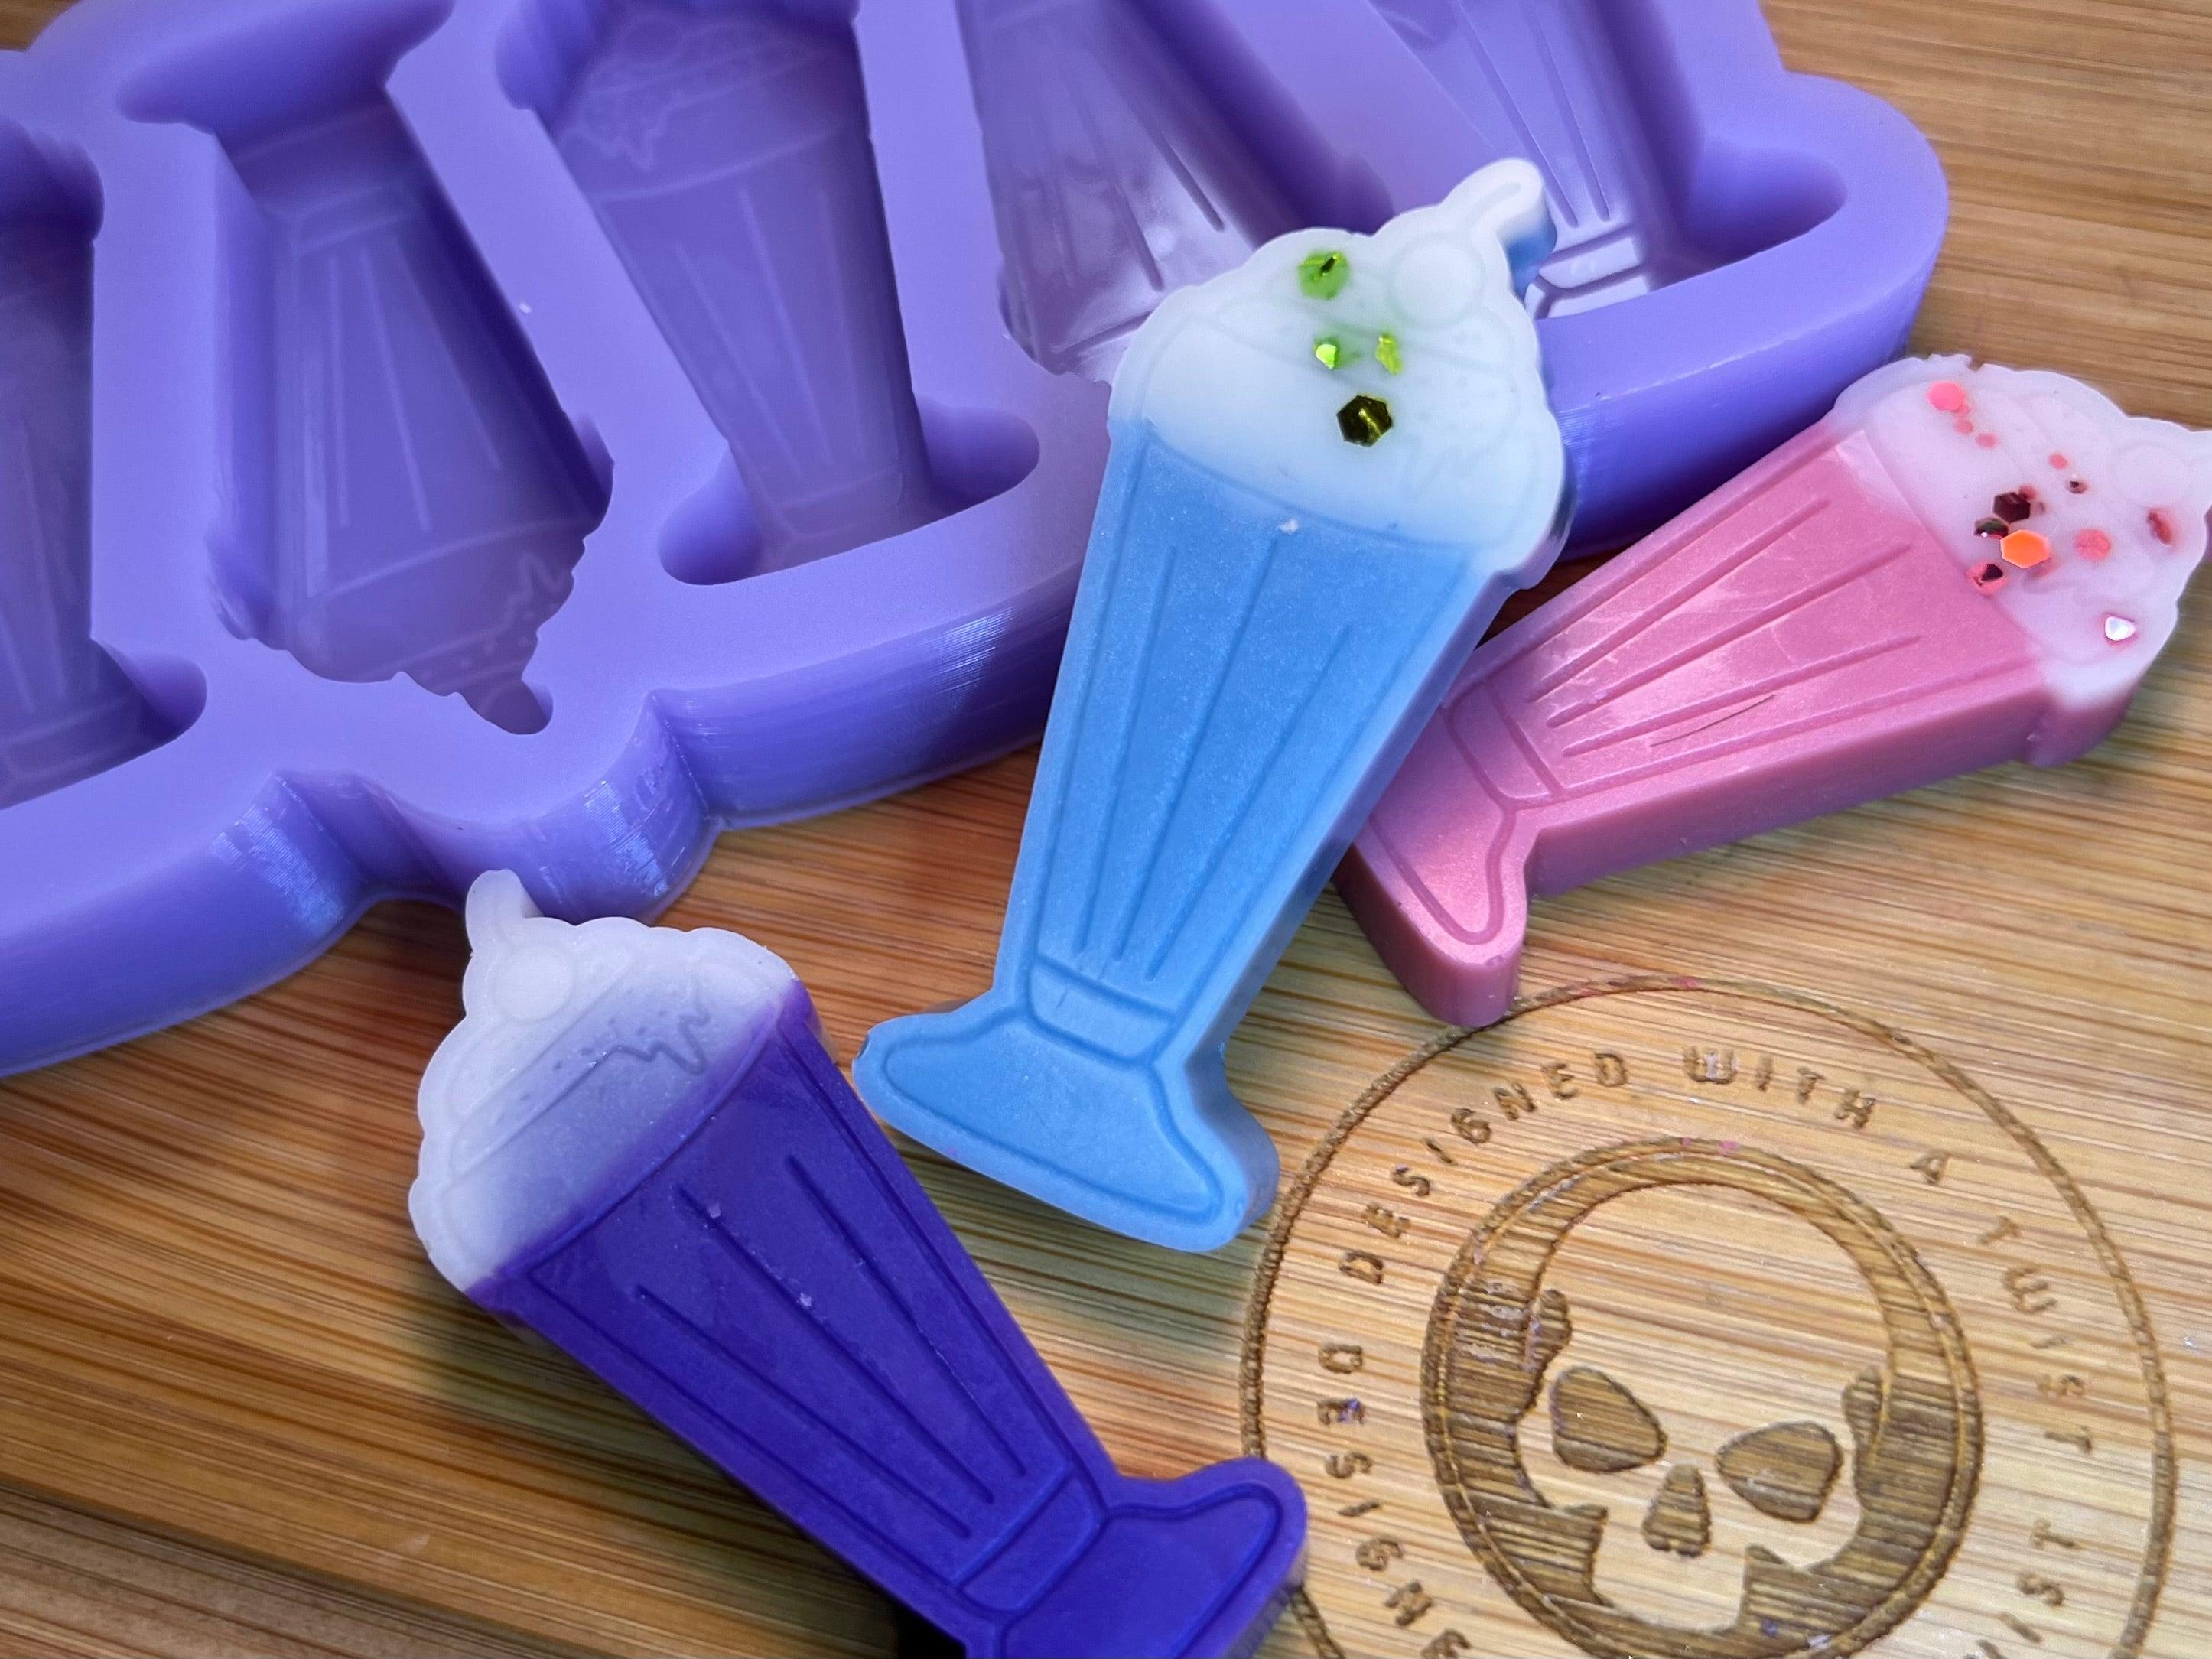 Milkshake Silicone Mold - Designed with a Twist  - Top quality silicone molds made in the UK.